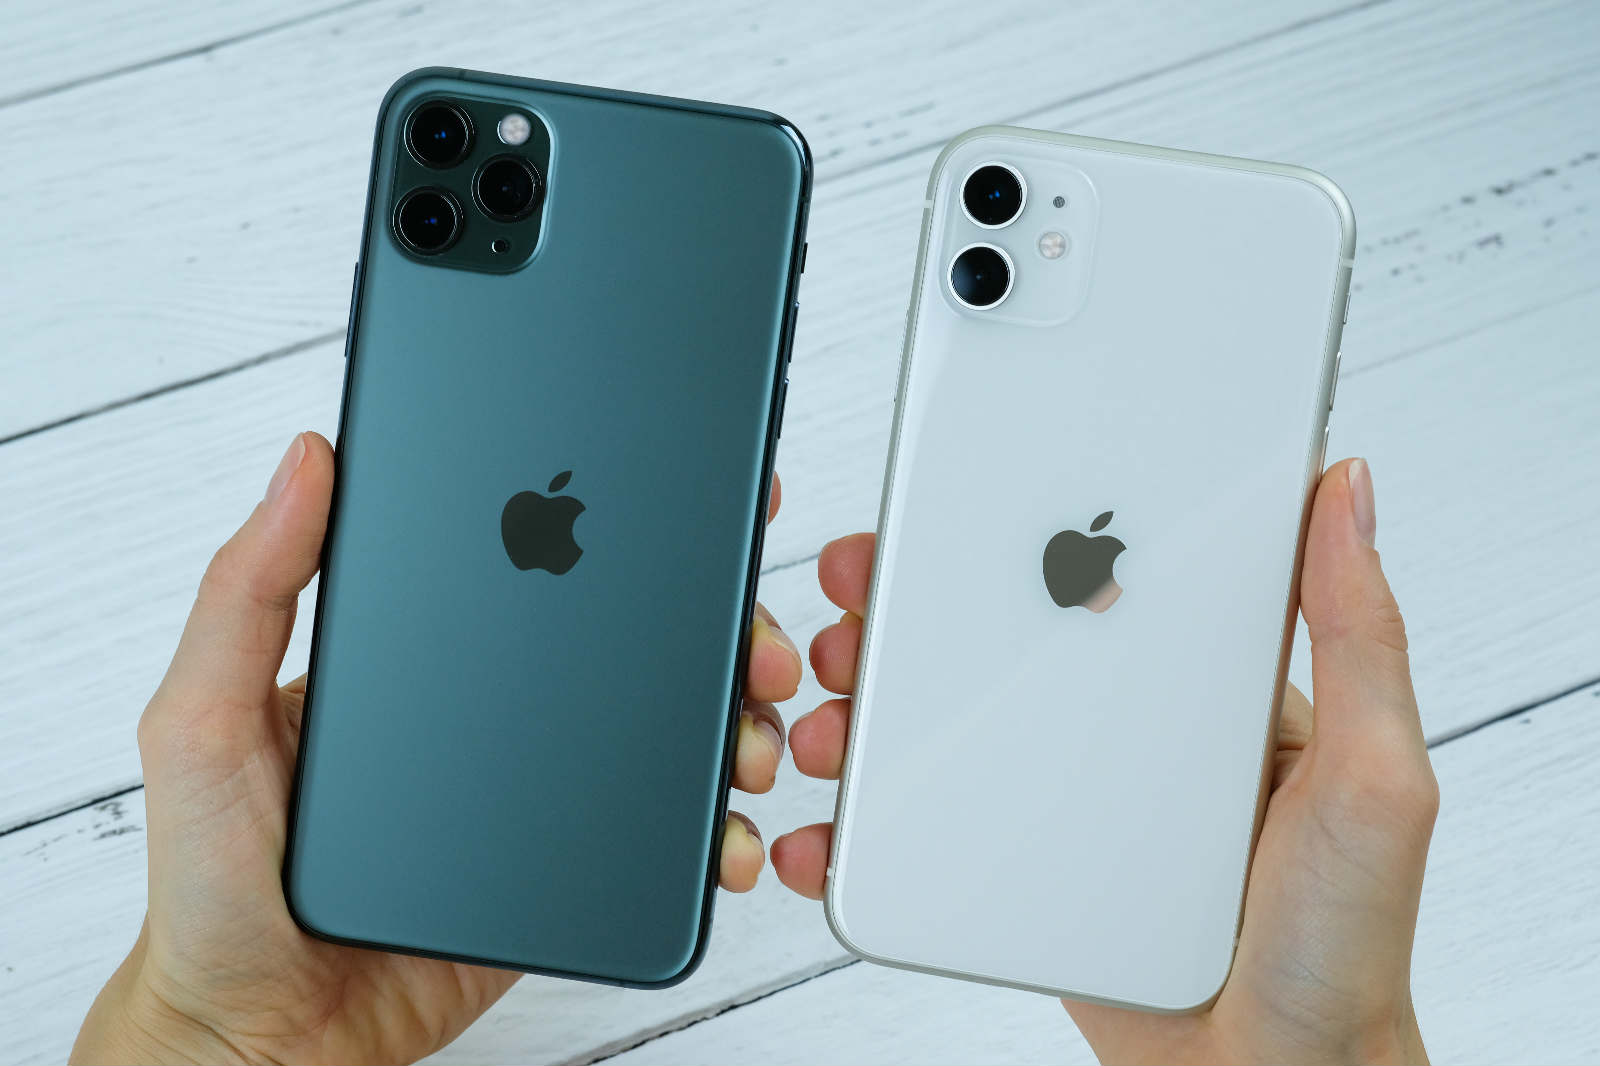 should i buy the iphone 11 pro